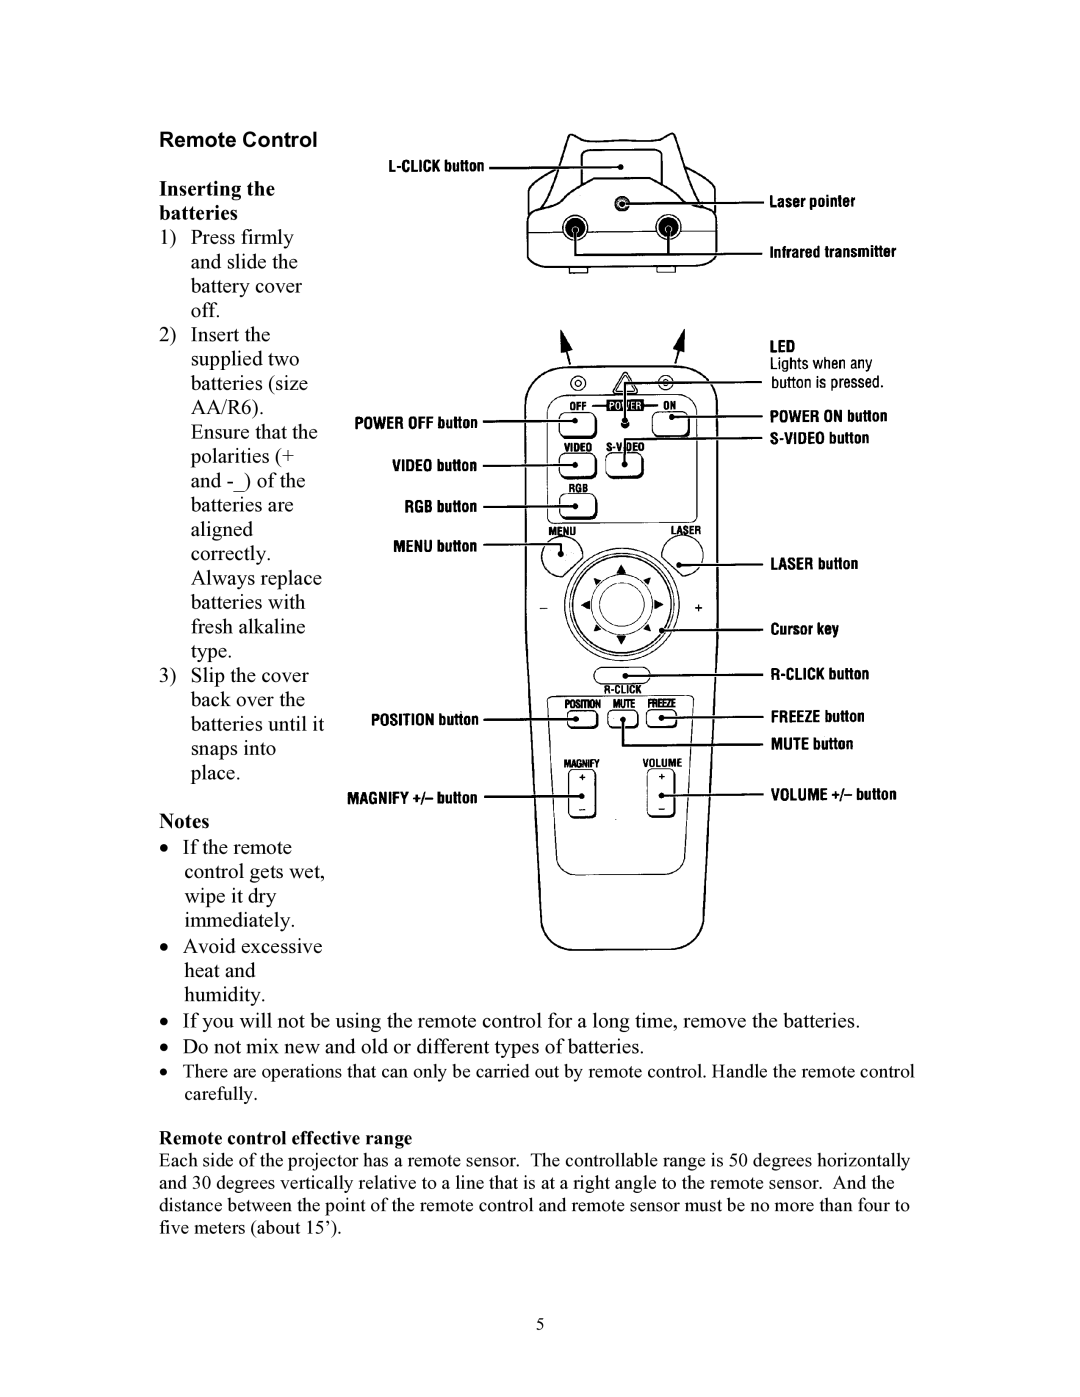 Knoll Systems HT200 user manual Remote Control, Inserting the batteries, Remote control effective range 